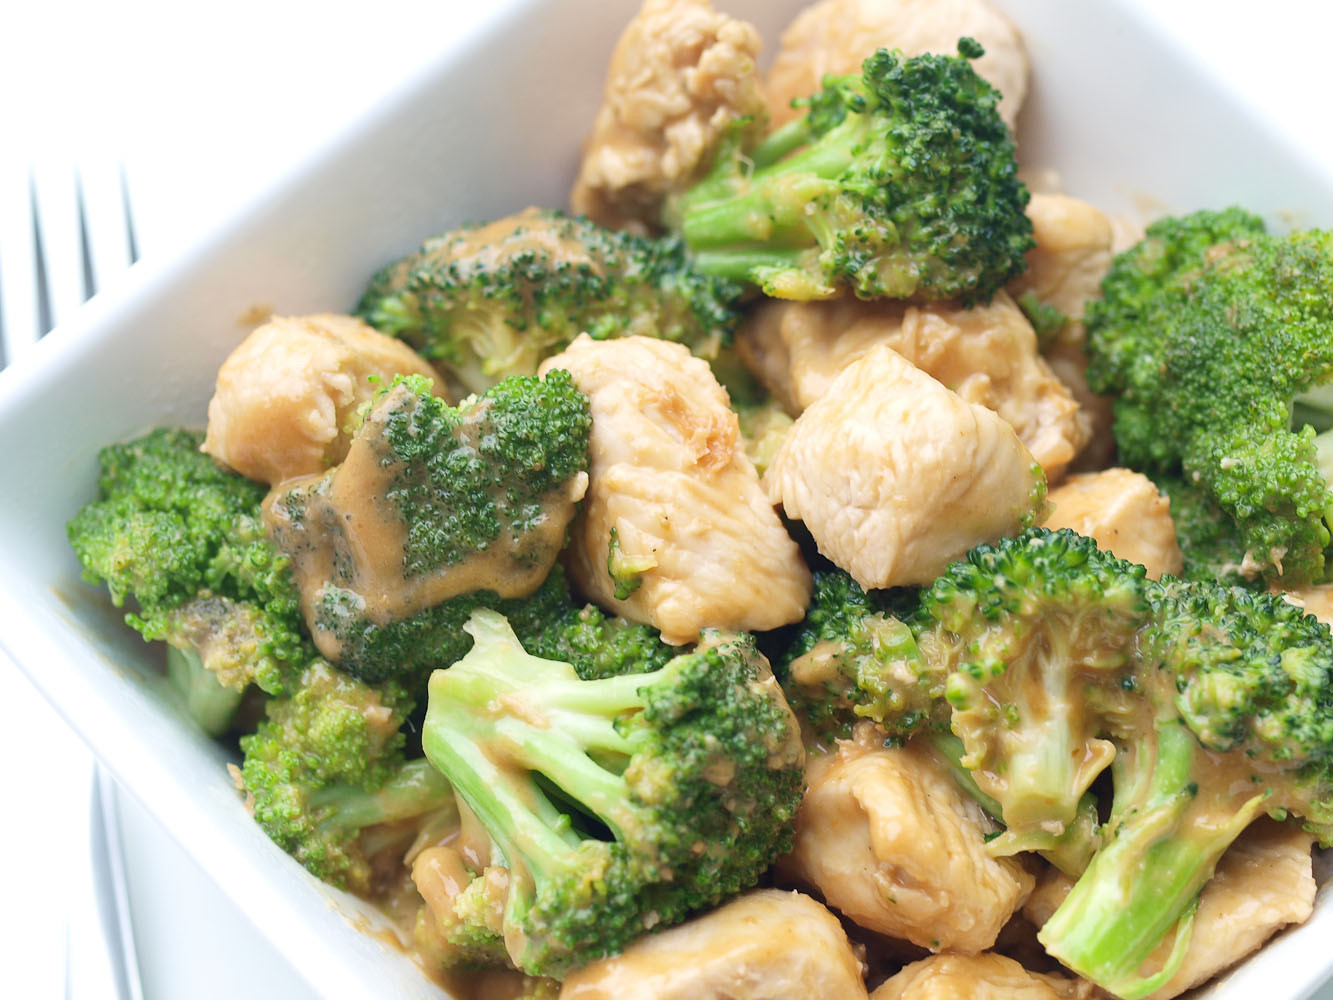 Healthy Chicken And Broccoli Recipes
 Easy Broccoli and Chicken with Peanut Sauce Happy